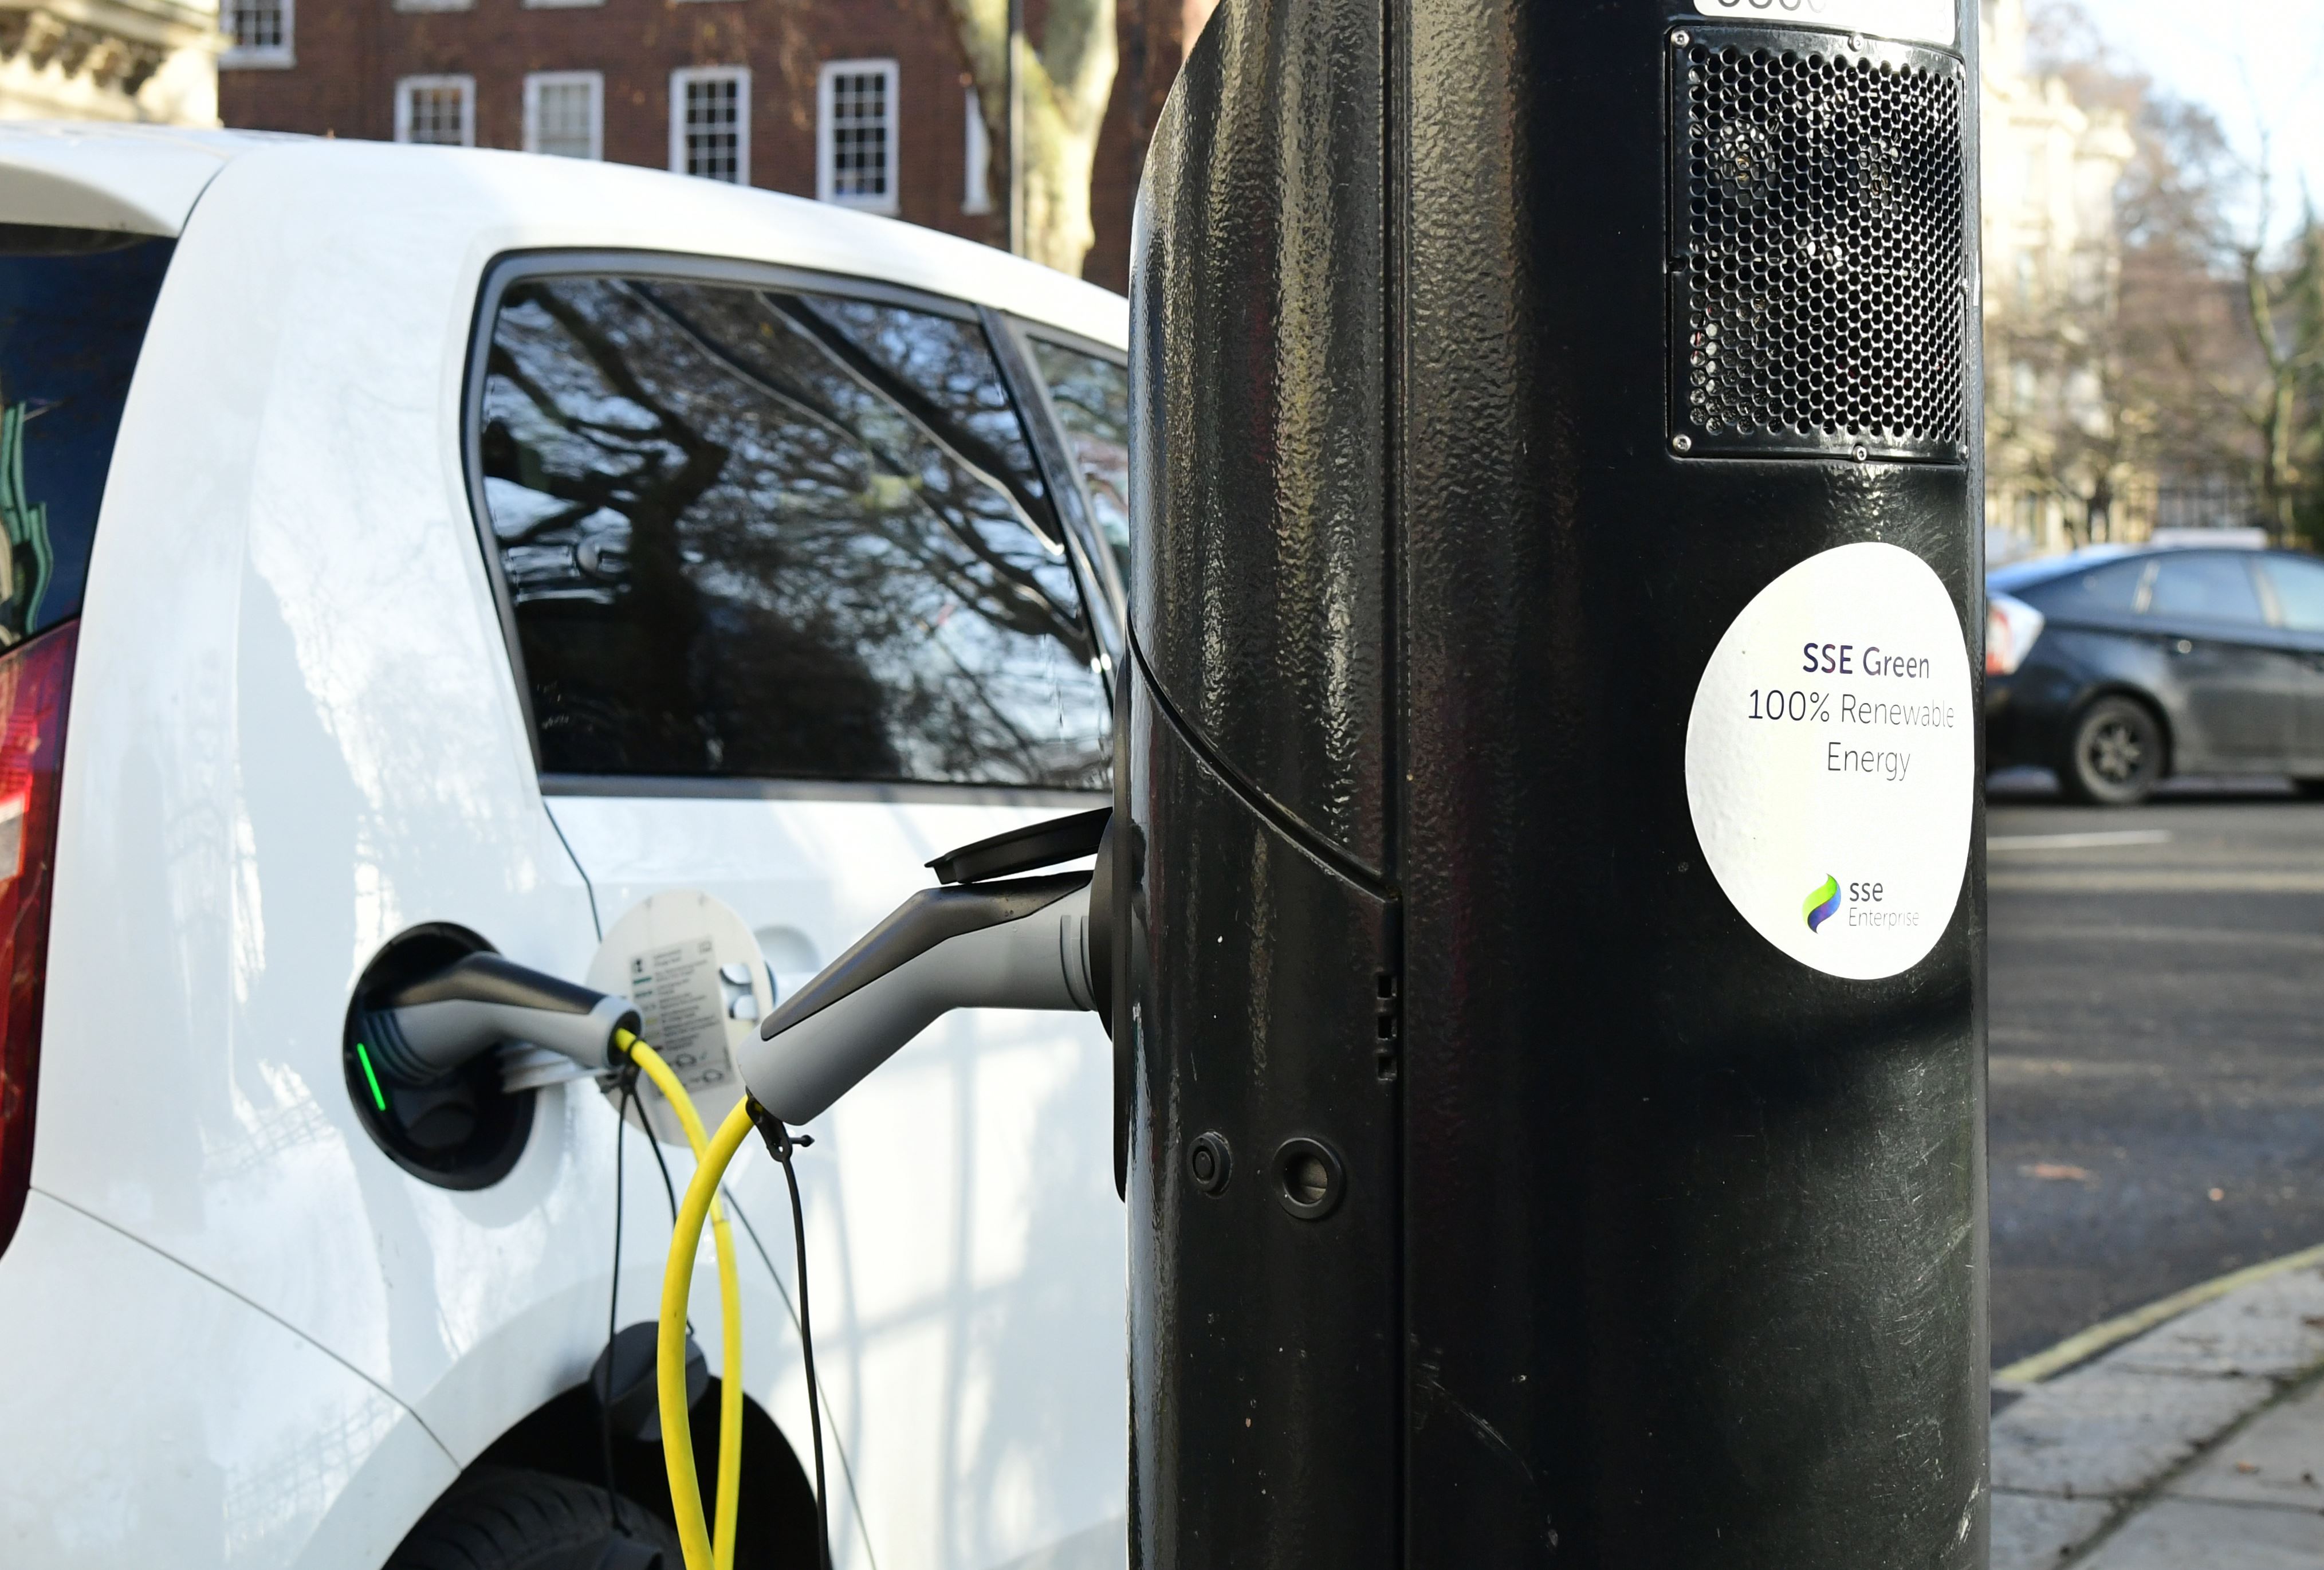 Electric vehicle charging devices outnumber petrol stations by two to one